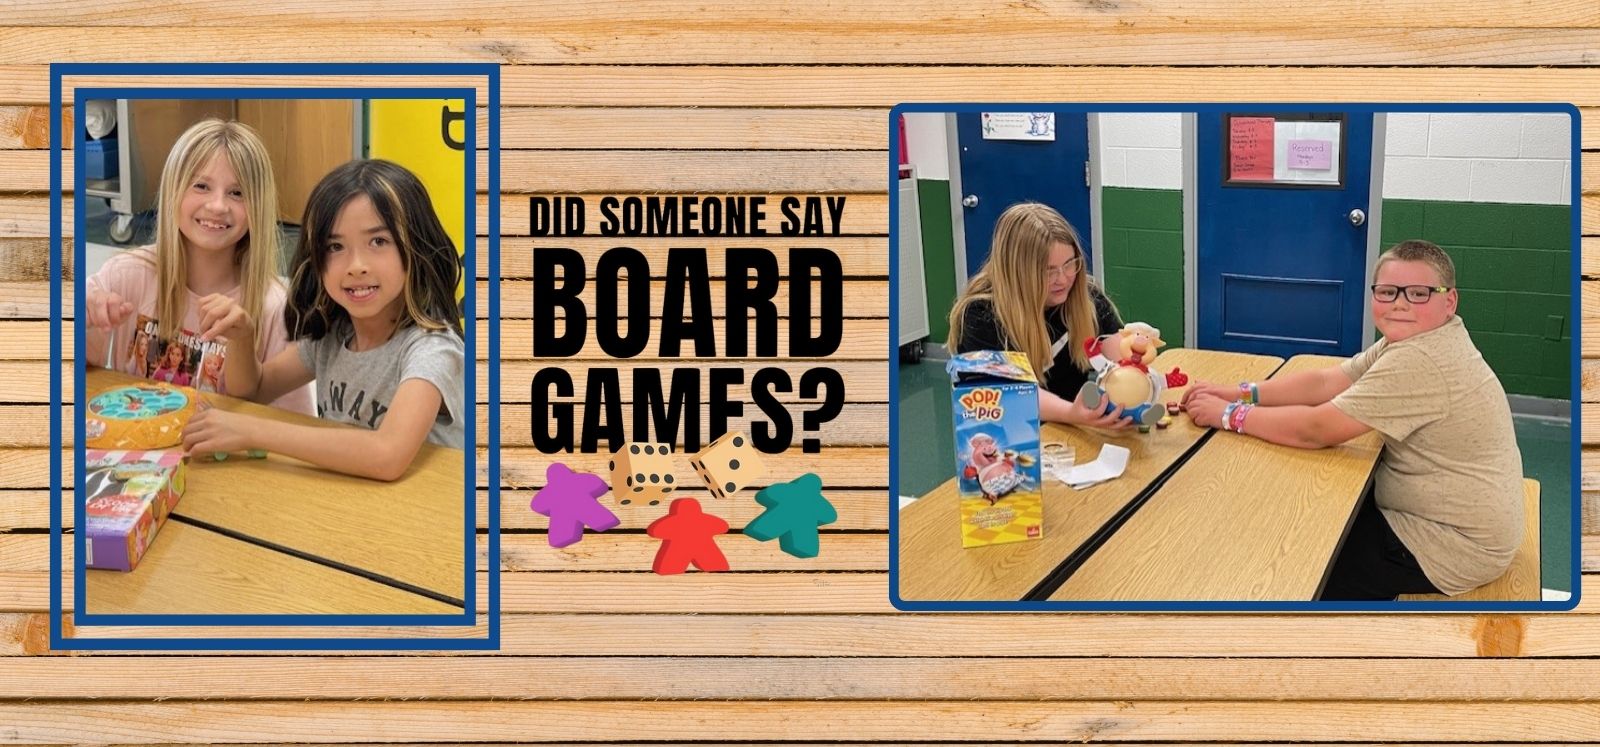 Book fair game night- Students sitting at a table playing board games